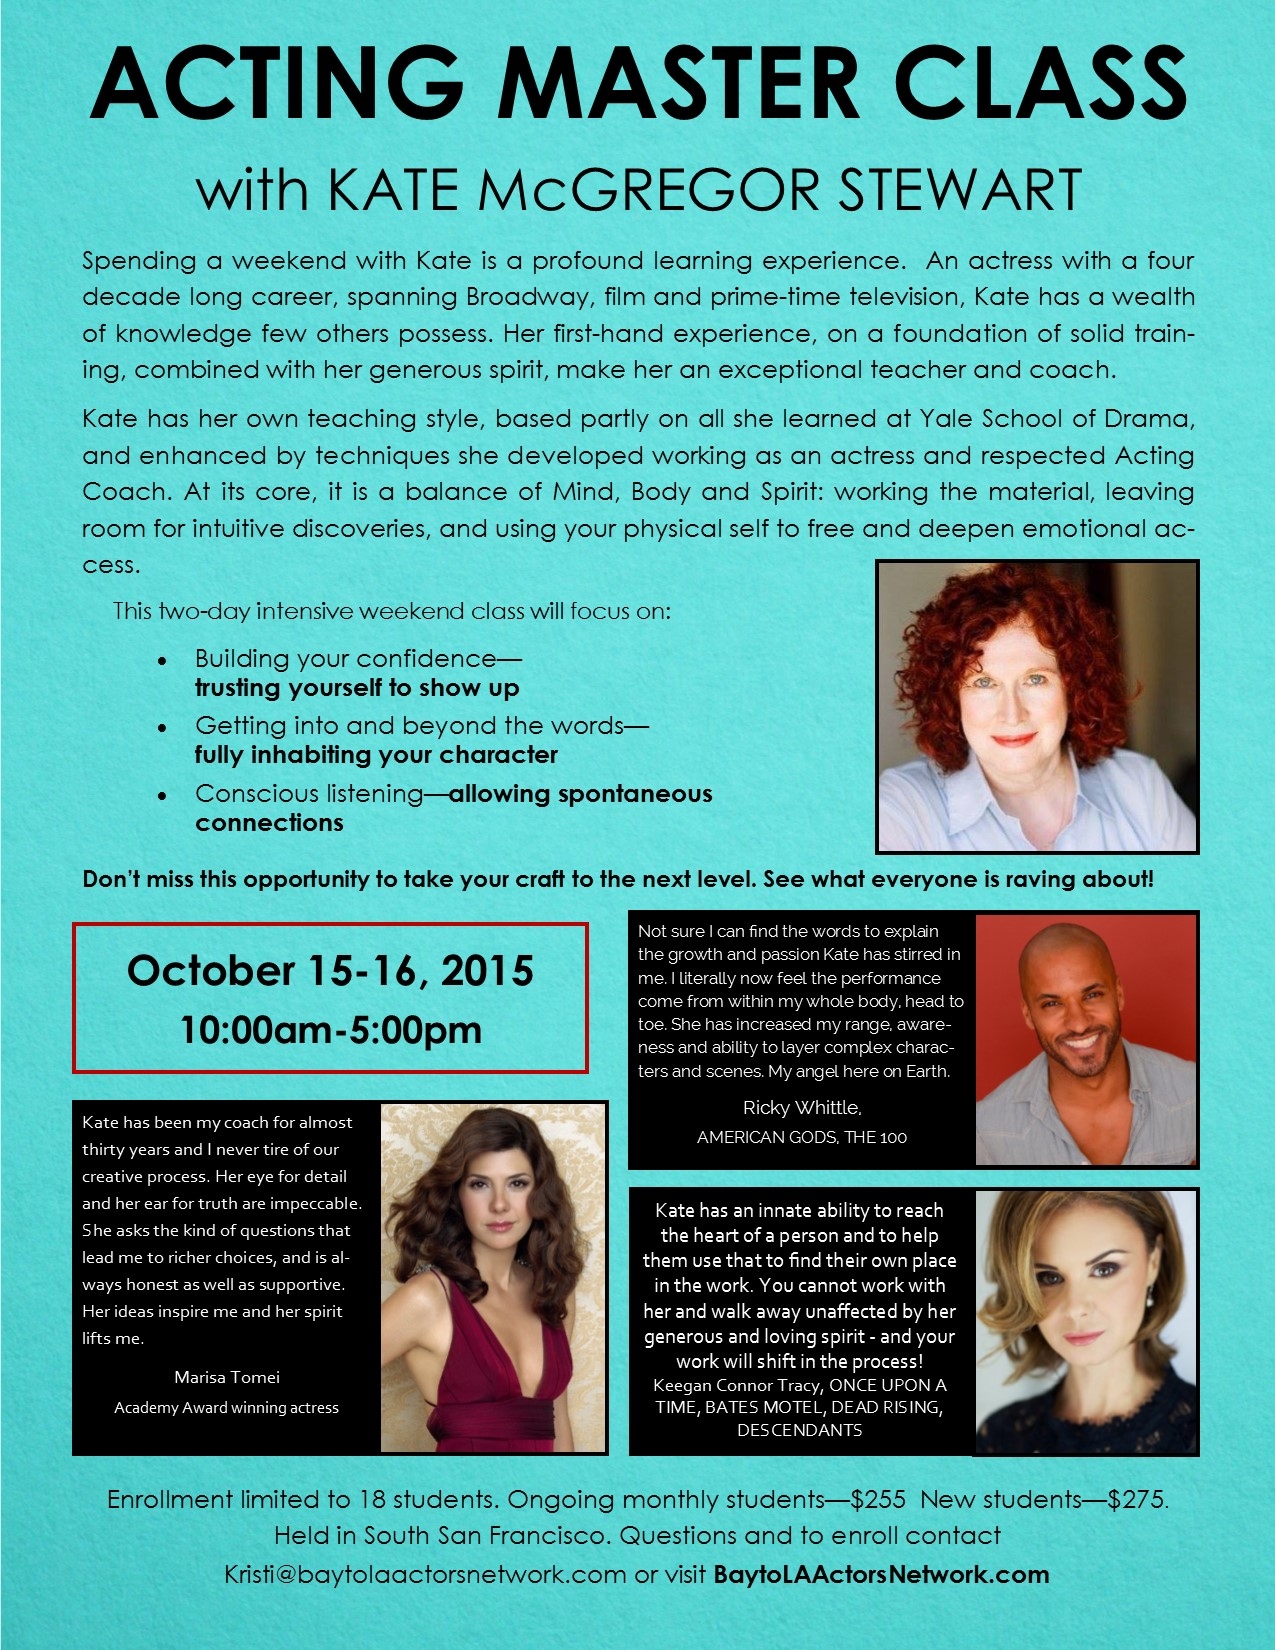 Acting Master Class with Kate McGregor Stewart